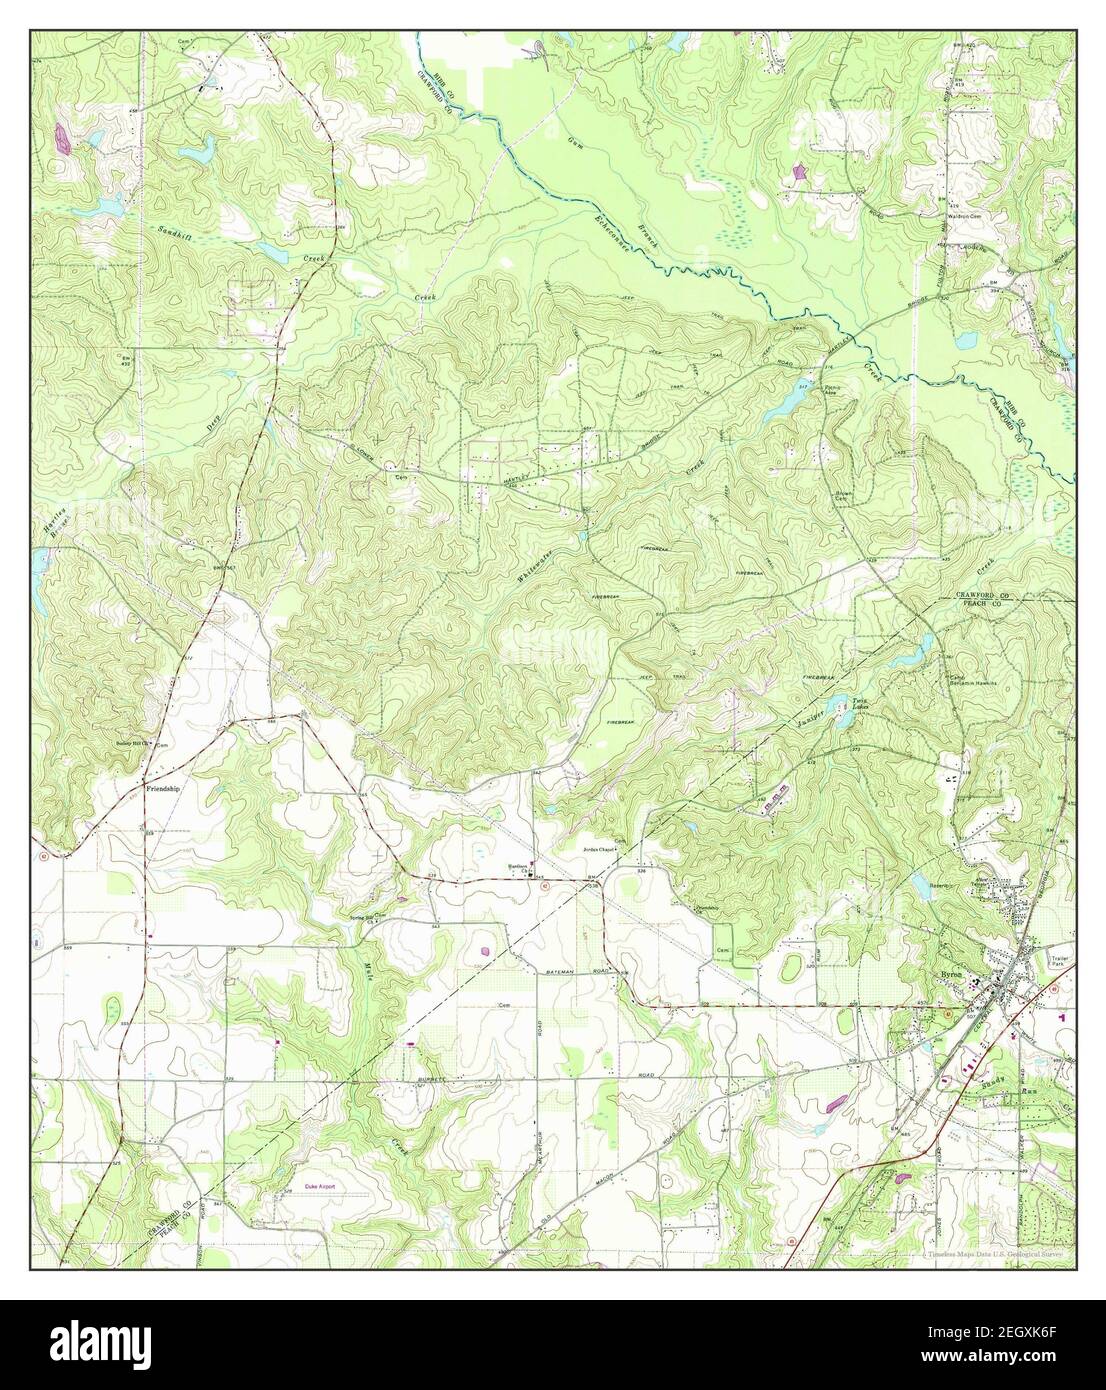 Byron, Georgia, map 1974, 1:24000, United States of America by Timeless Maps, data U.S. Geological Survey Stock Photo